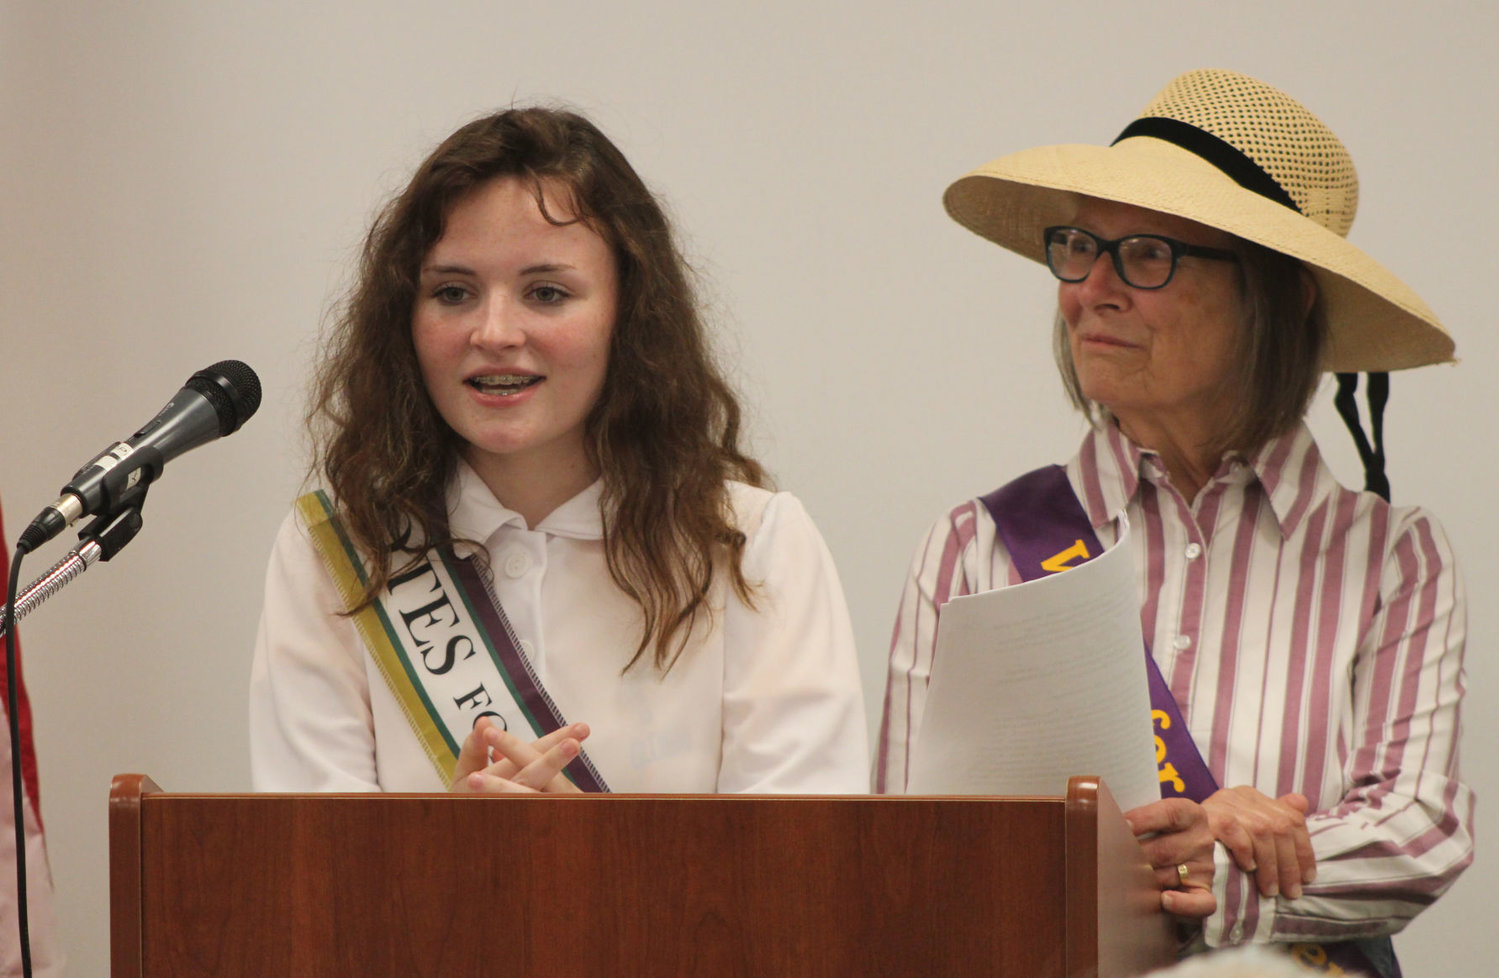 North Montgomery High School student Mae Dees speaks during the kickoff celebration for the women's suffrage centennial as Helen Hudson looks on Monday at the Crawfordsville District Public Library. Dees has been working to get classmates involved with the League.